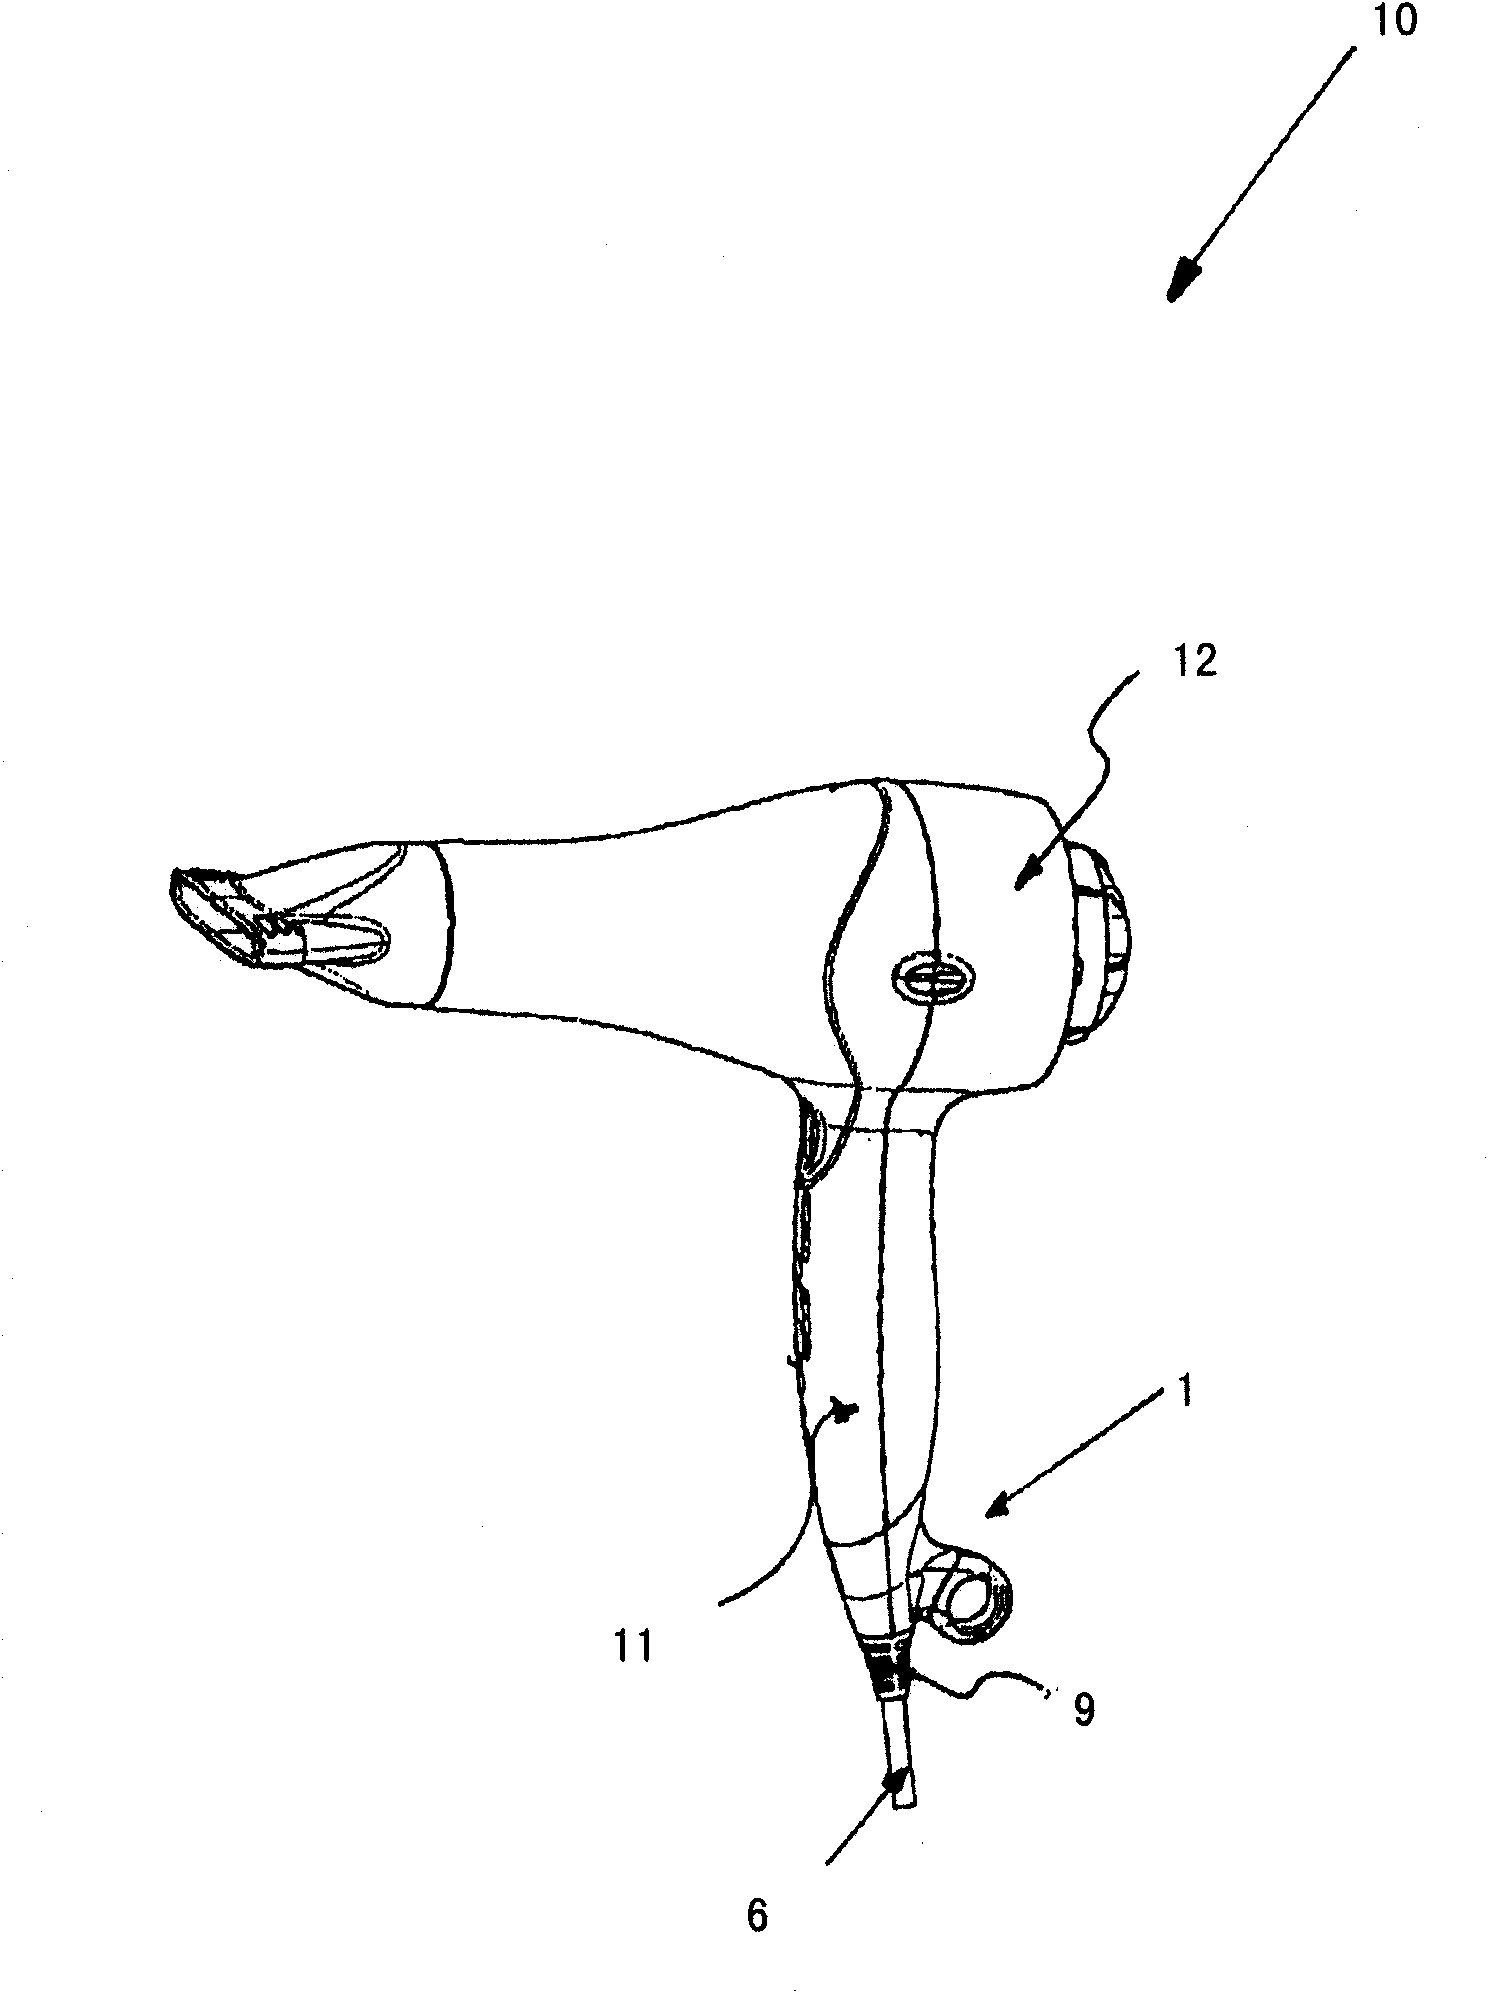 Rotating device for electrically connecting electric household appliances and electric tools